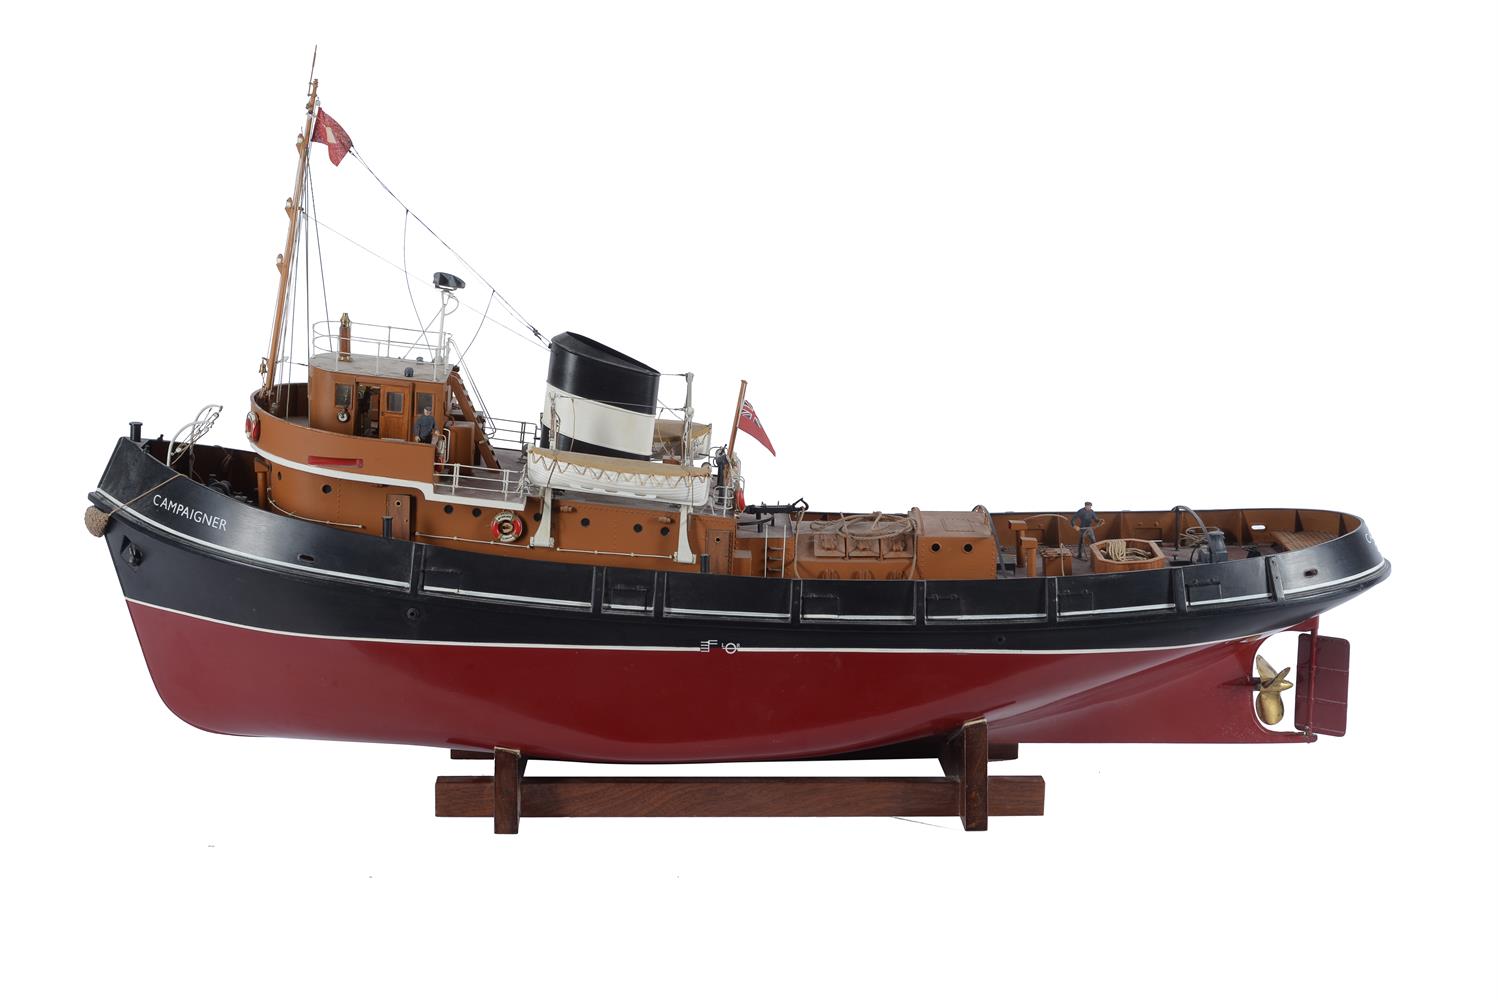 AN AWARD-WINNING MODEL OF THE LIVE STEAM CAMPAIGN TUG 'CAMPAIGNER'